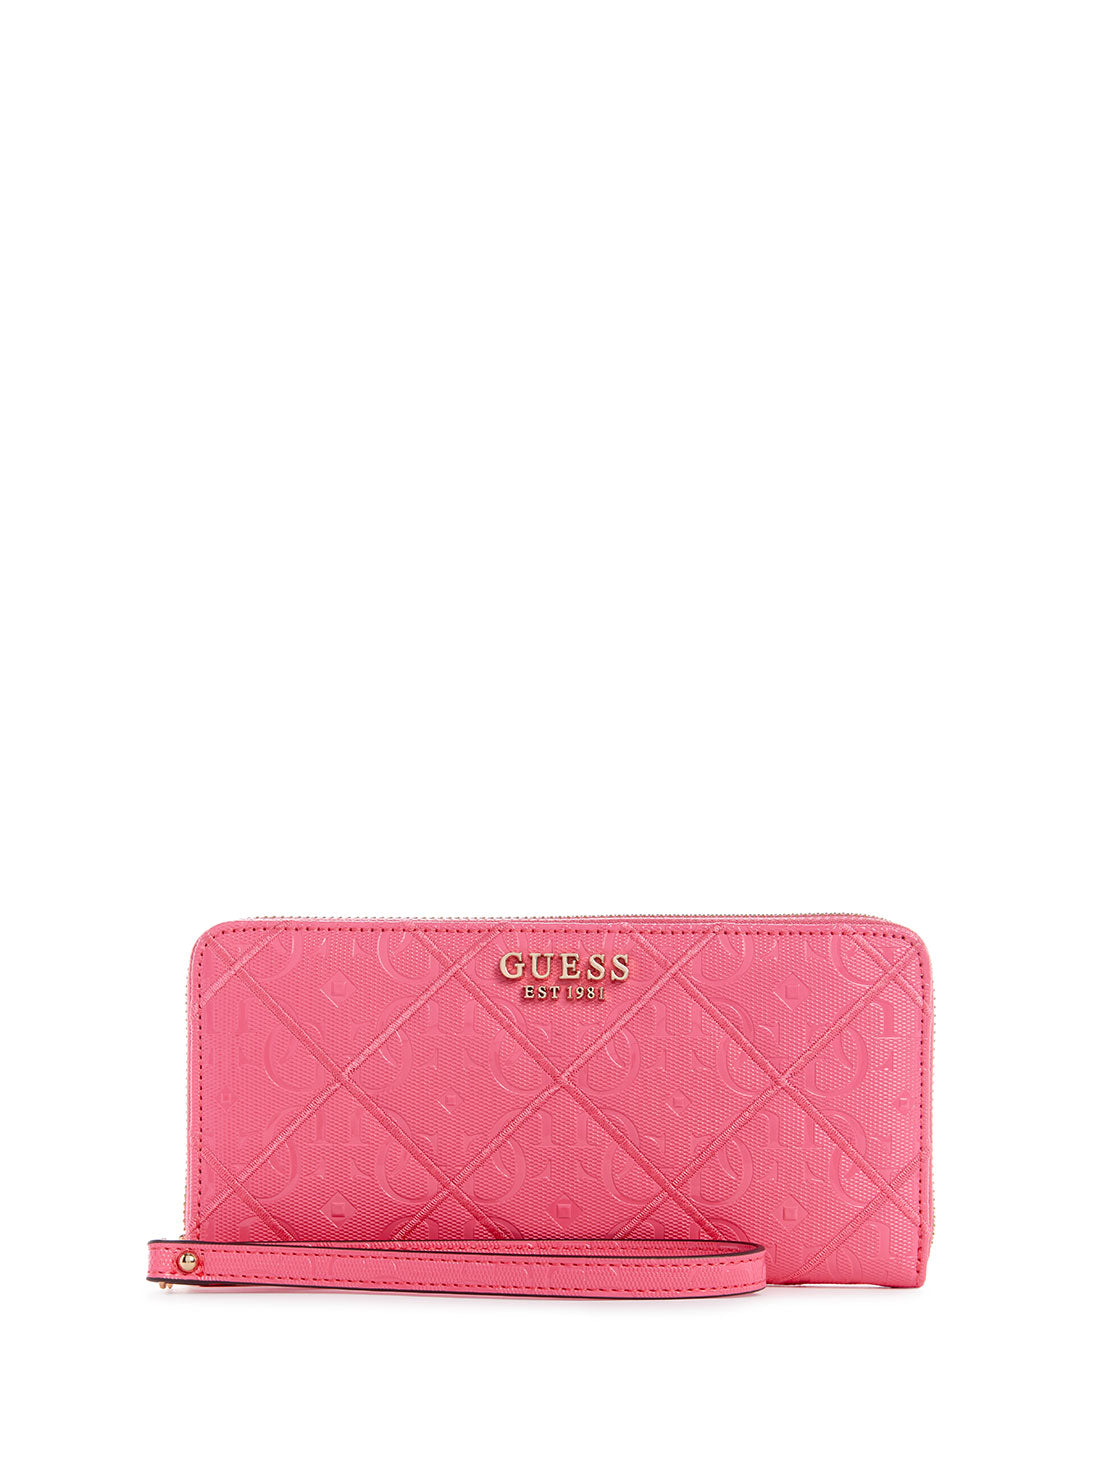 GUESS Women's Magenta Caddie Large Wallet GG878346 Front View